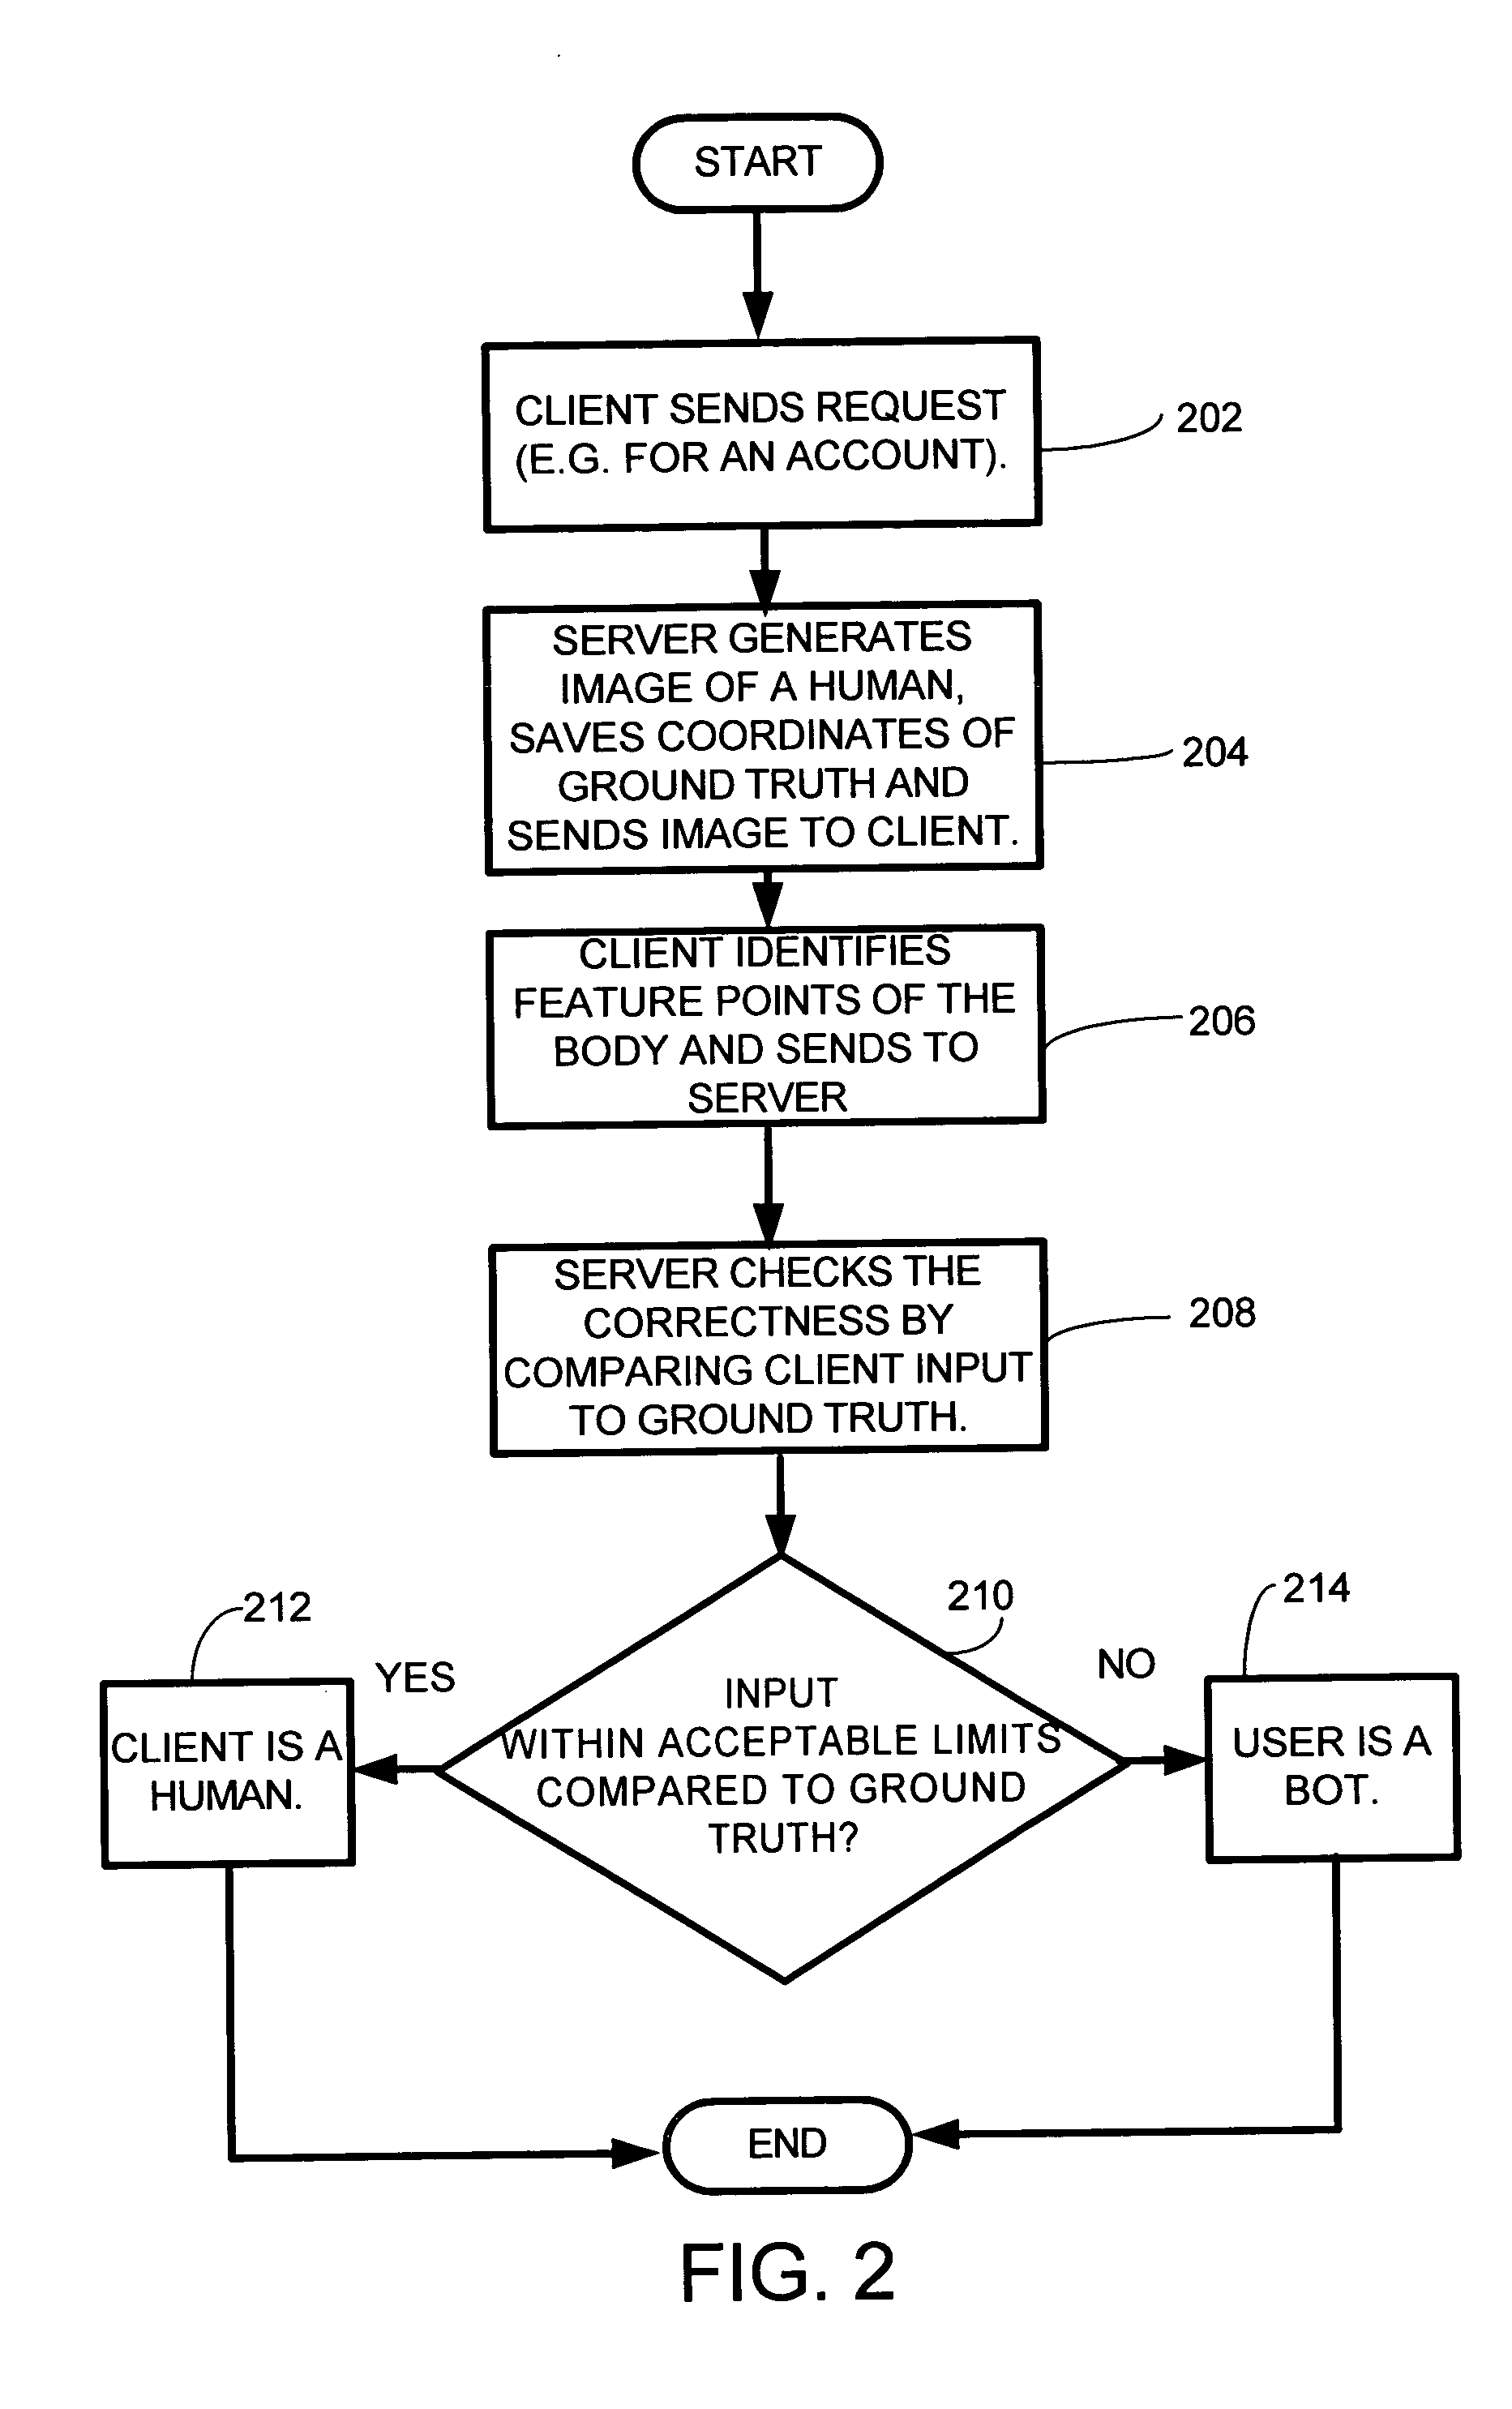 System and method for devising a human interactive proof that determines whether a remote client is a human or a computer program